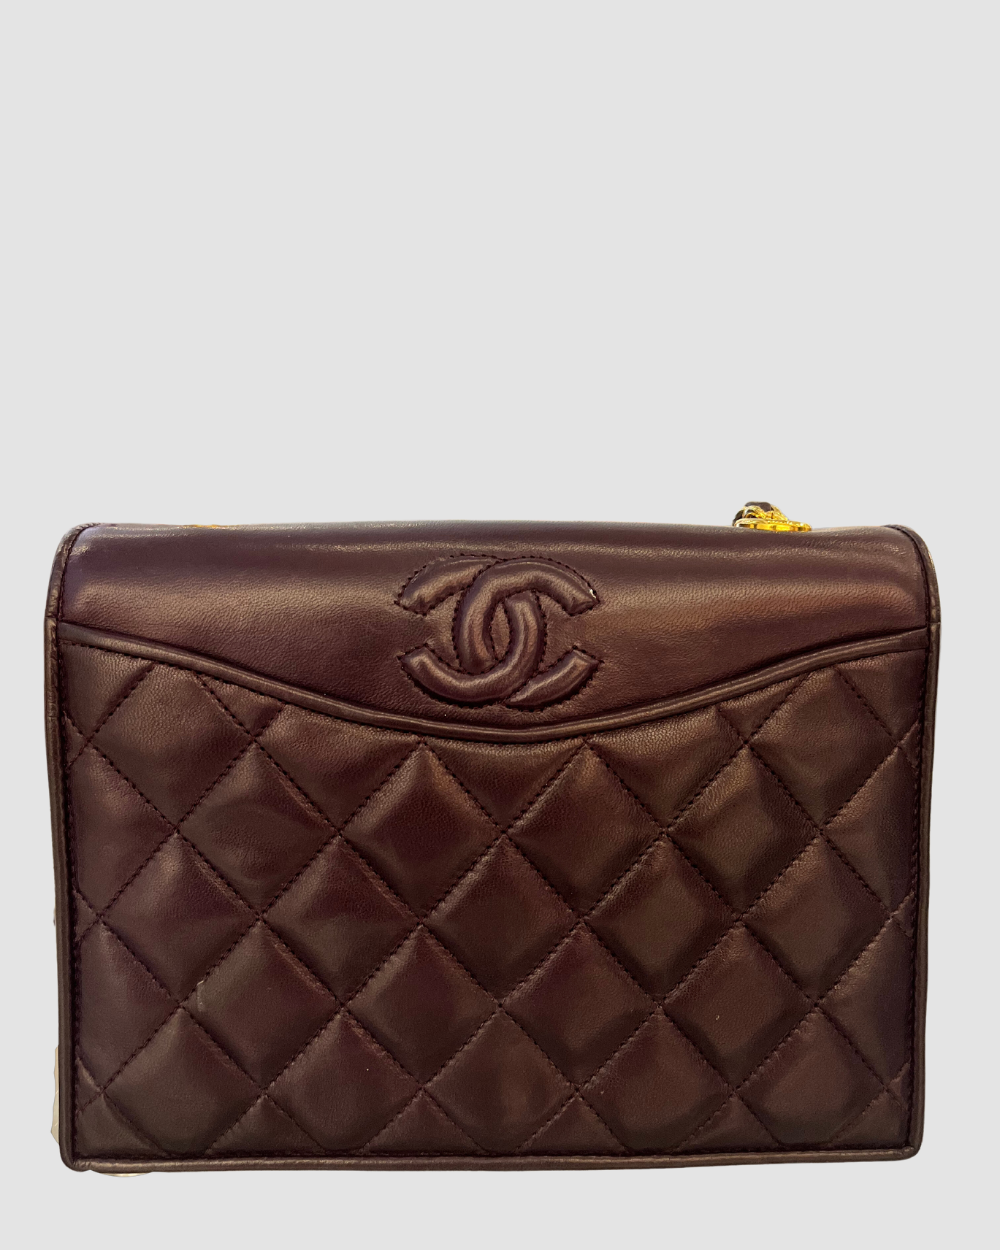 Chanel Purple Lambskin Quilted Mini Bag GHW